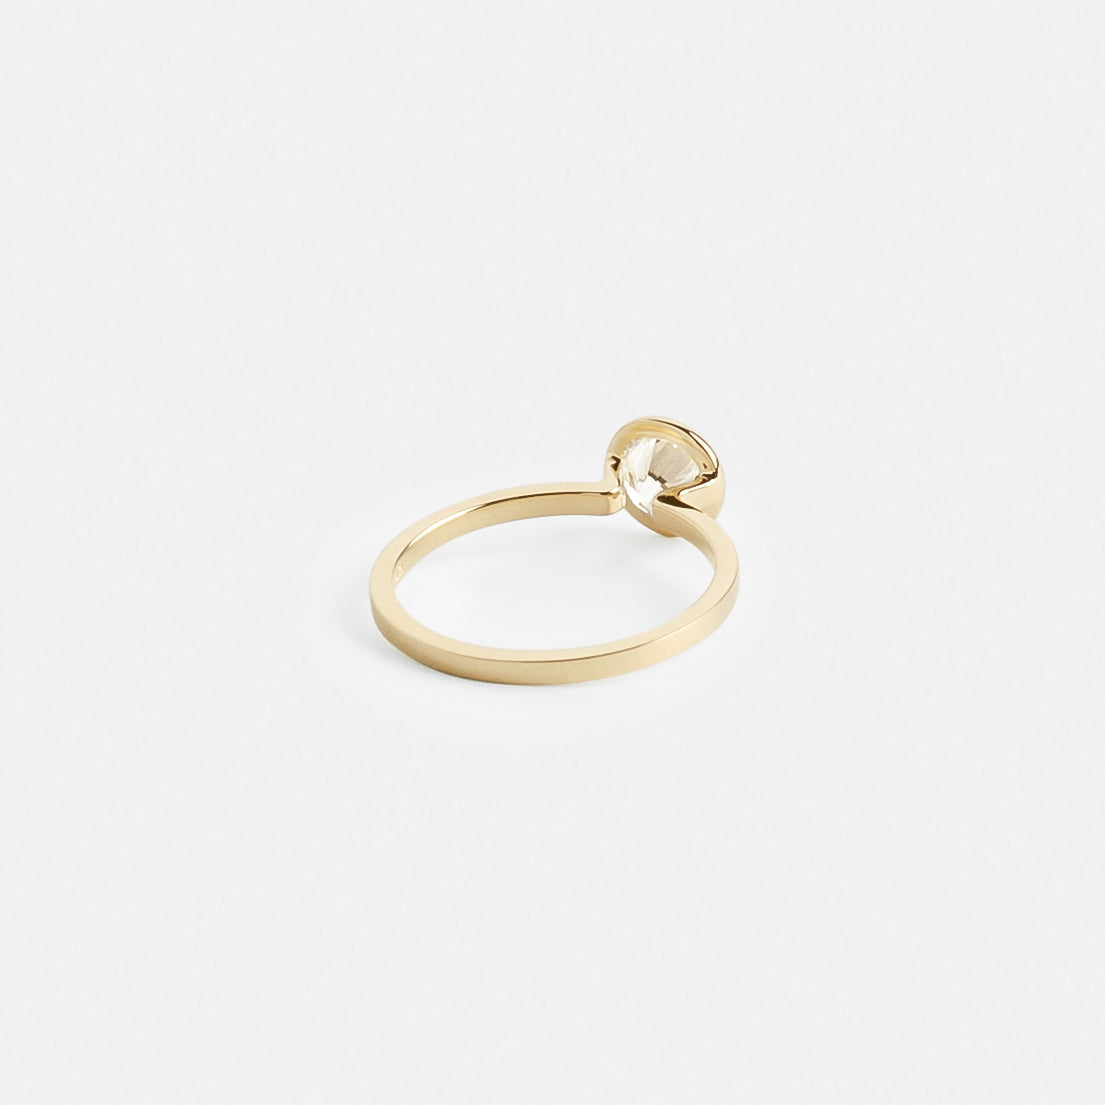 Mana Designer Engagement Ring in 14k Gold set with a round brilliant cut lab-grown diamond By SHW Fine Jewelry NYC